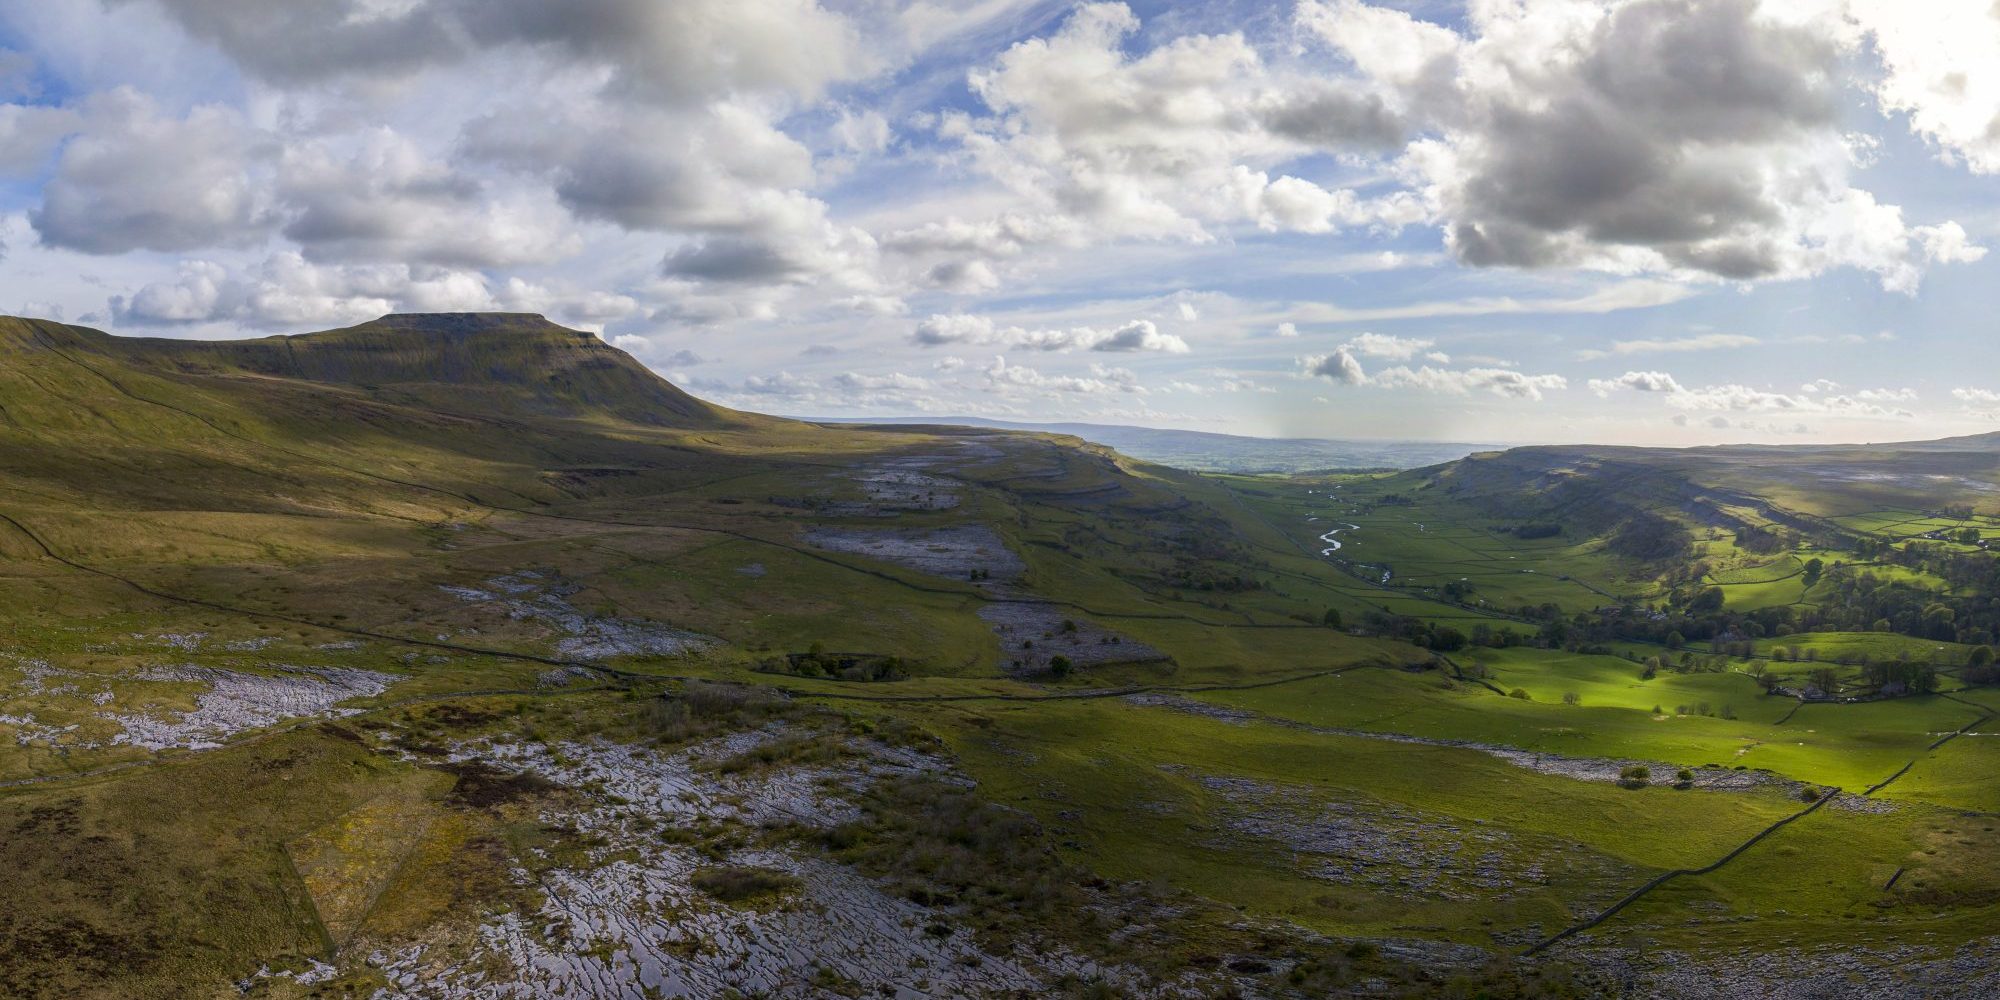 Drone panoramic of grass and limestone pavement in the foreground and Ingleborough mountain in the background